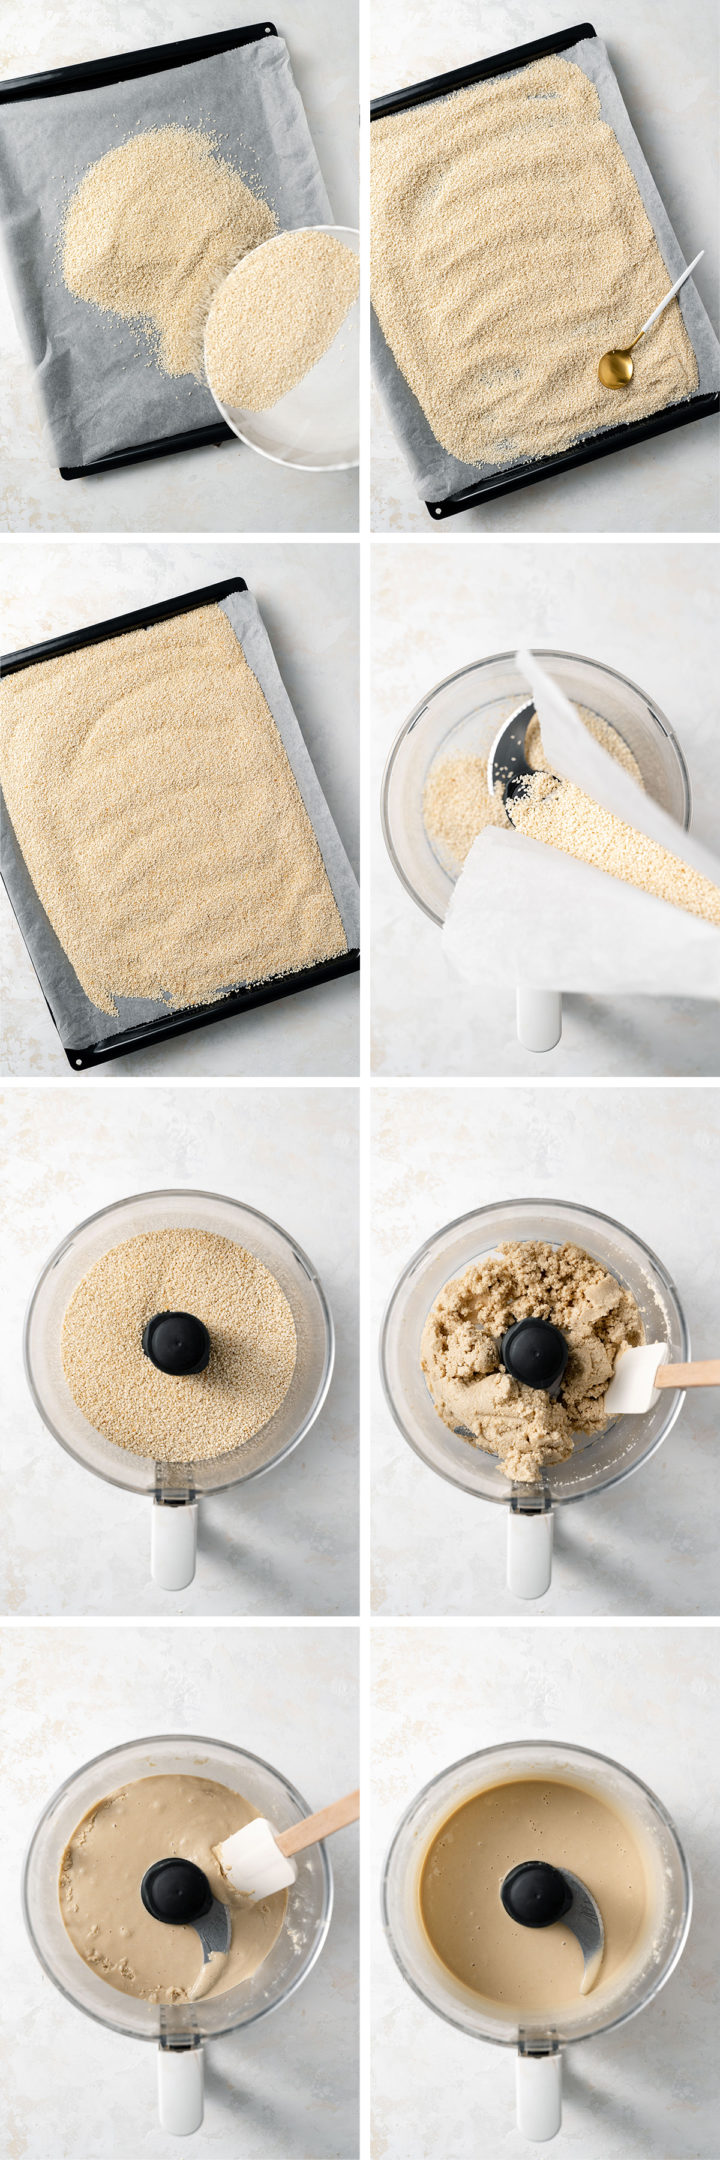 step by step photos showing how to make tahini